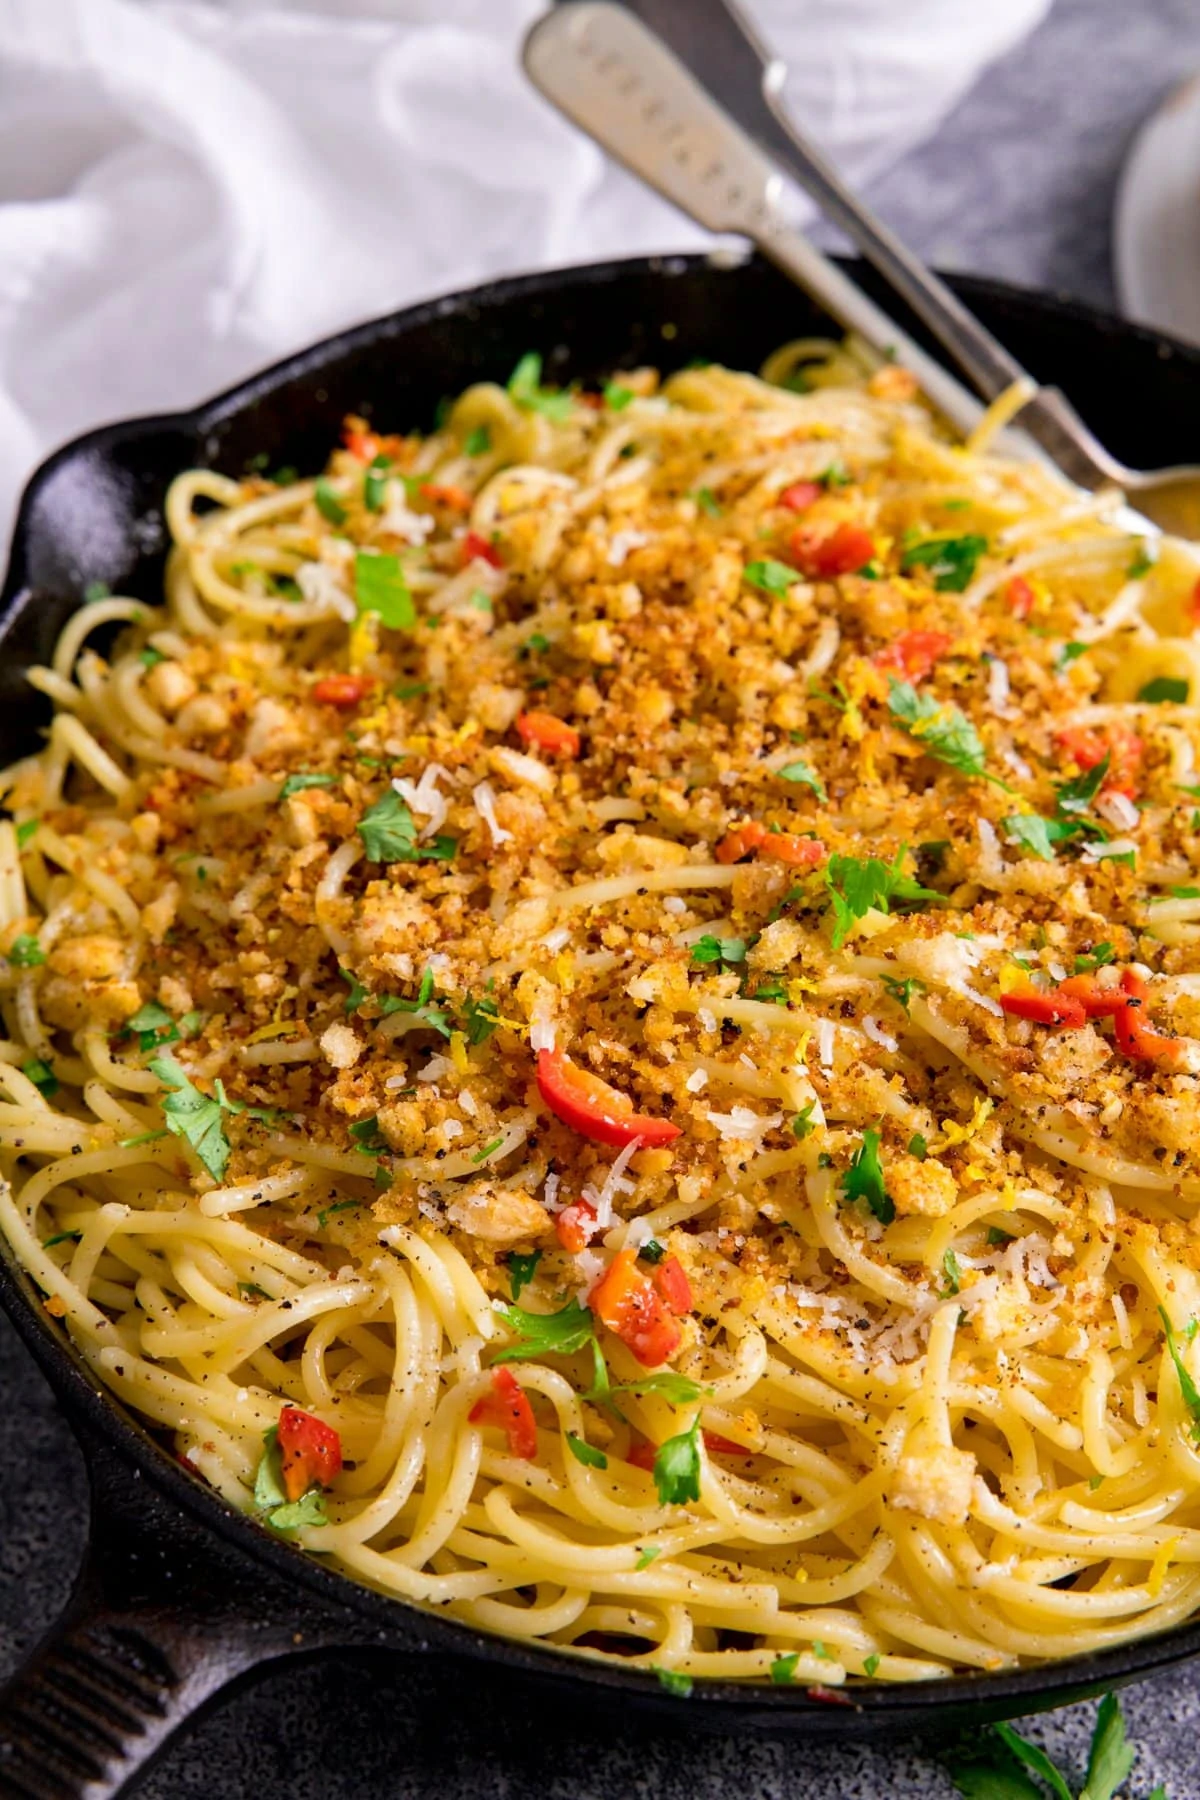 Black pan filled with spaghetti this is mixed with garlic breadcrumbs, chilli and parmesan.